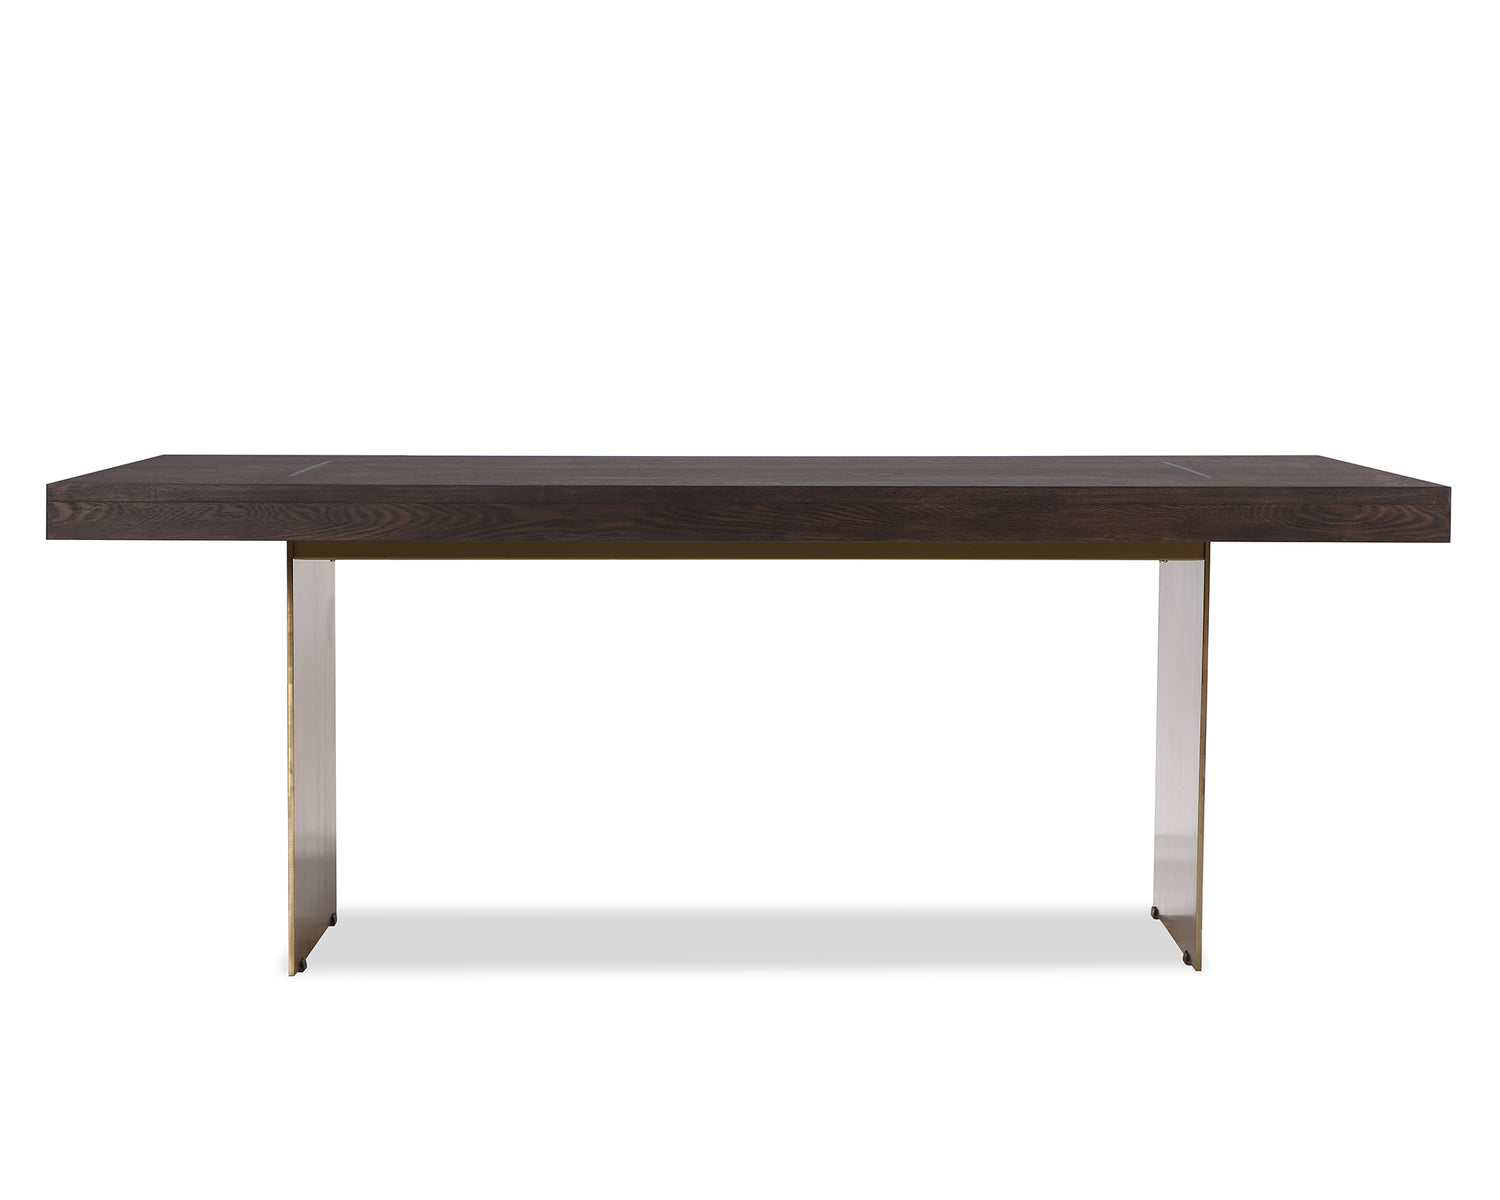  LiangAndEimil-Liang & Eimil Unma Dining Table Dark Brown- 13 